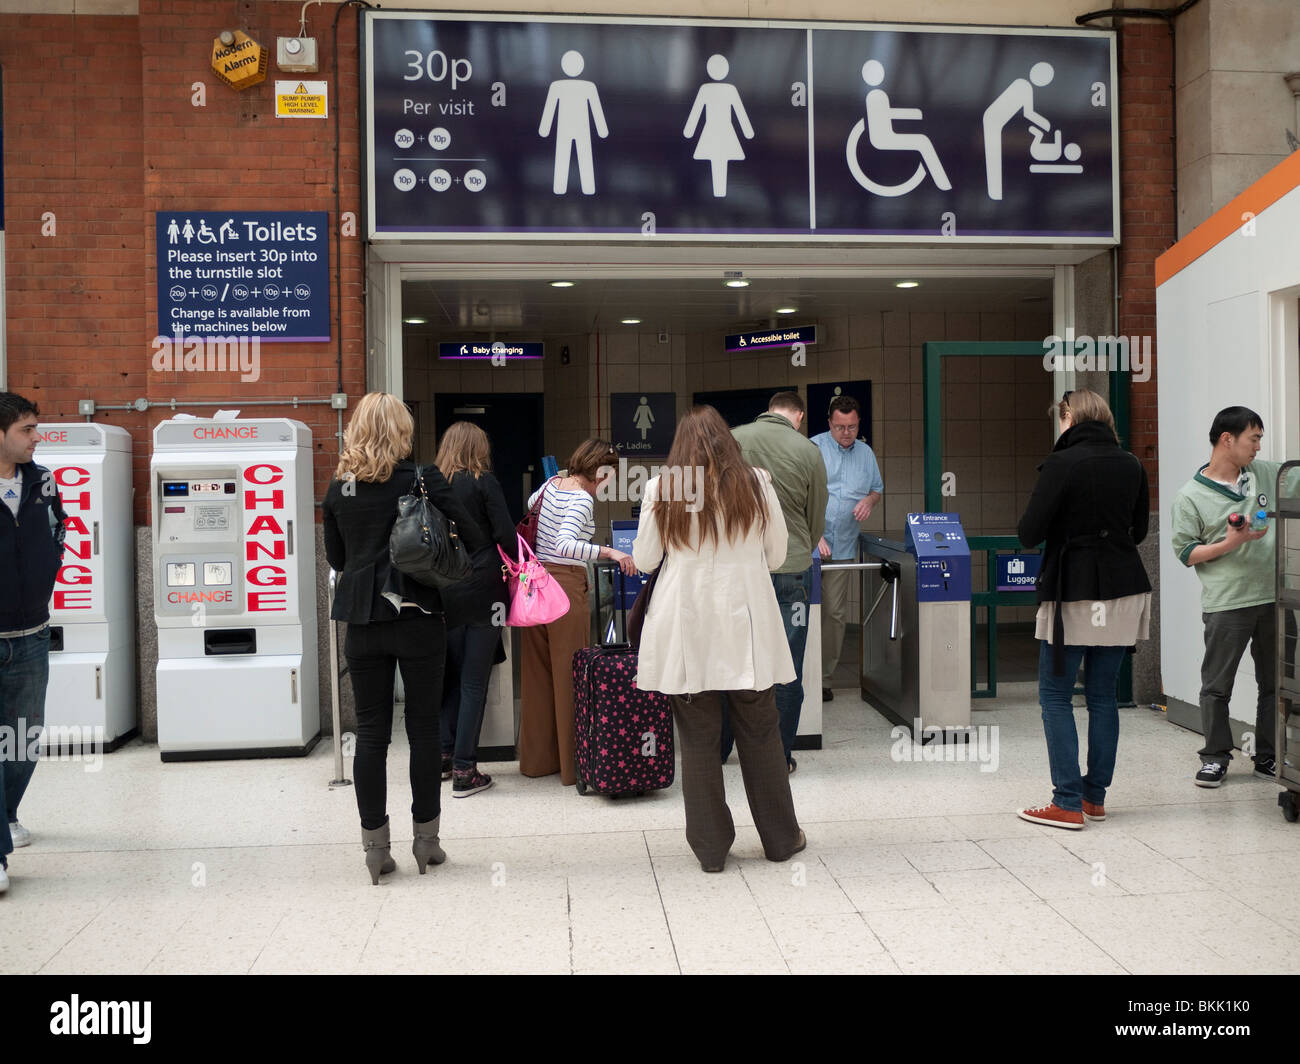 Toilets Victoria Station High Resolution Stock Photography and Images -  Alamy